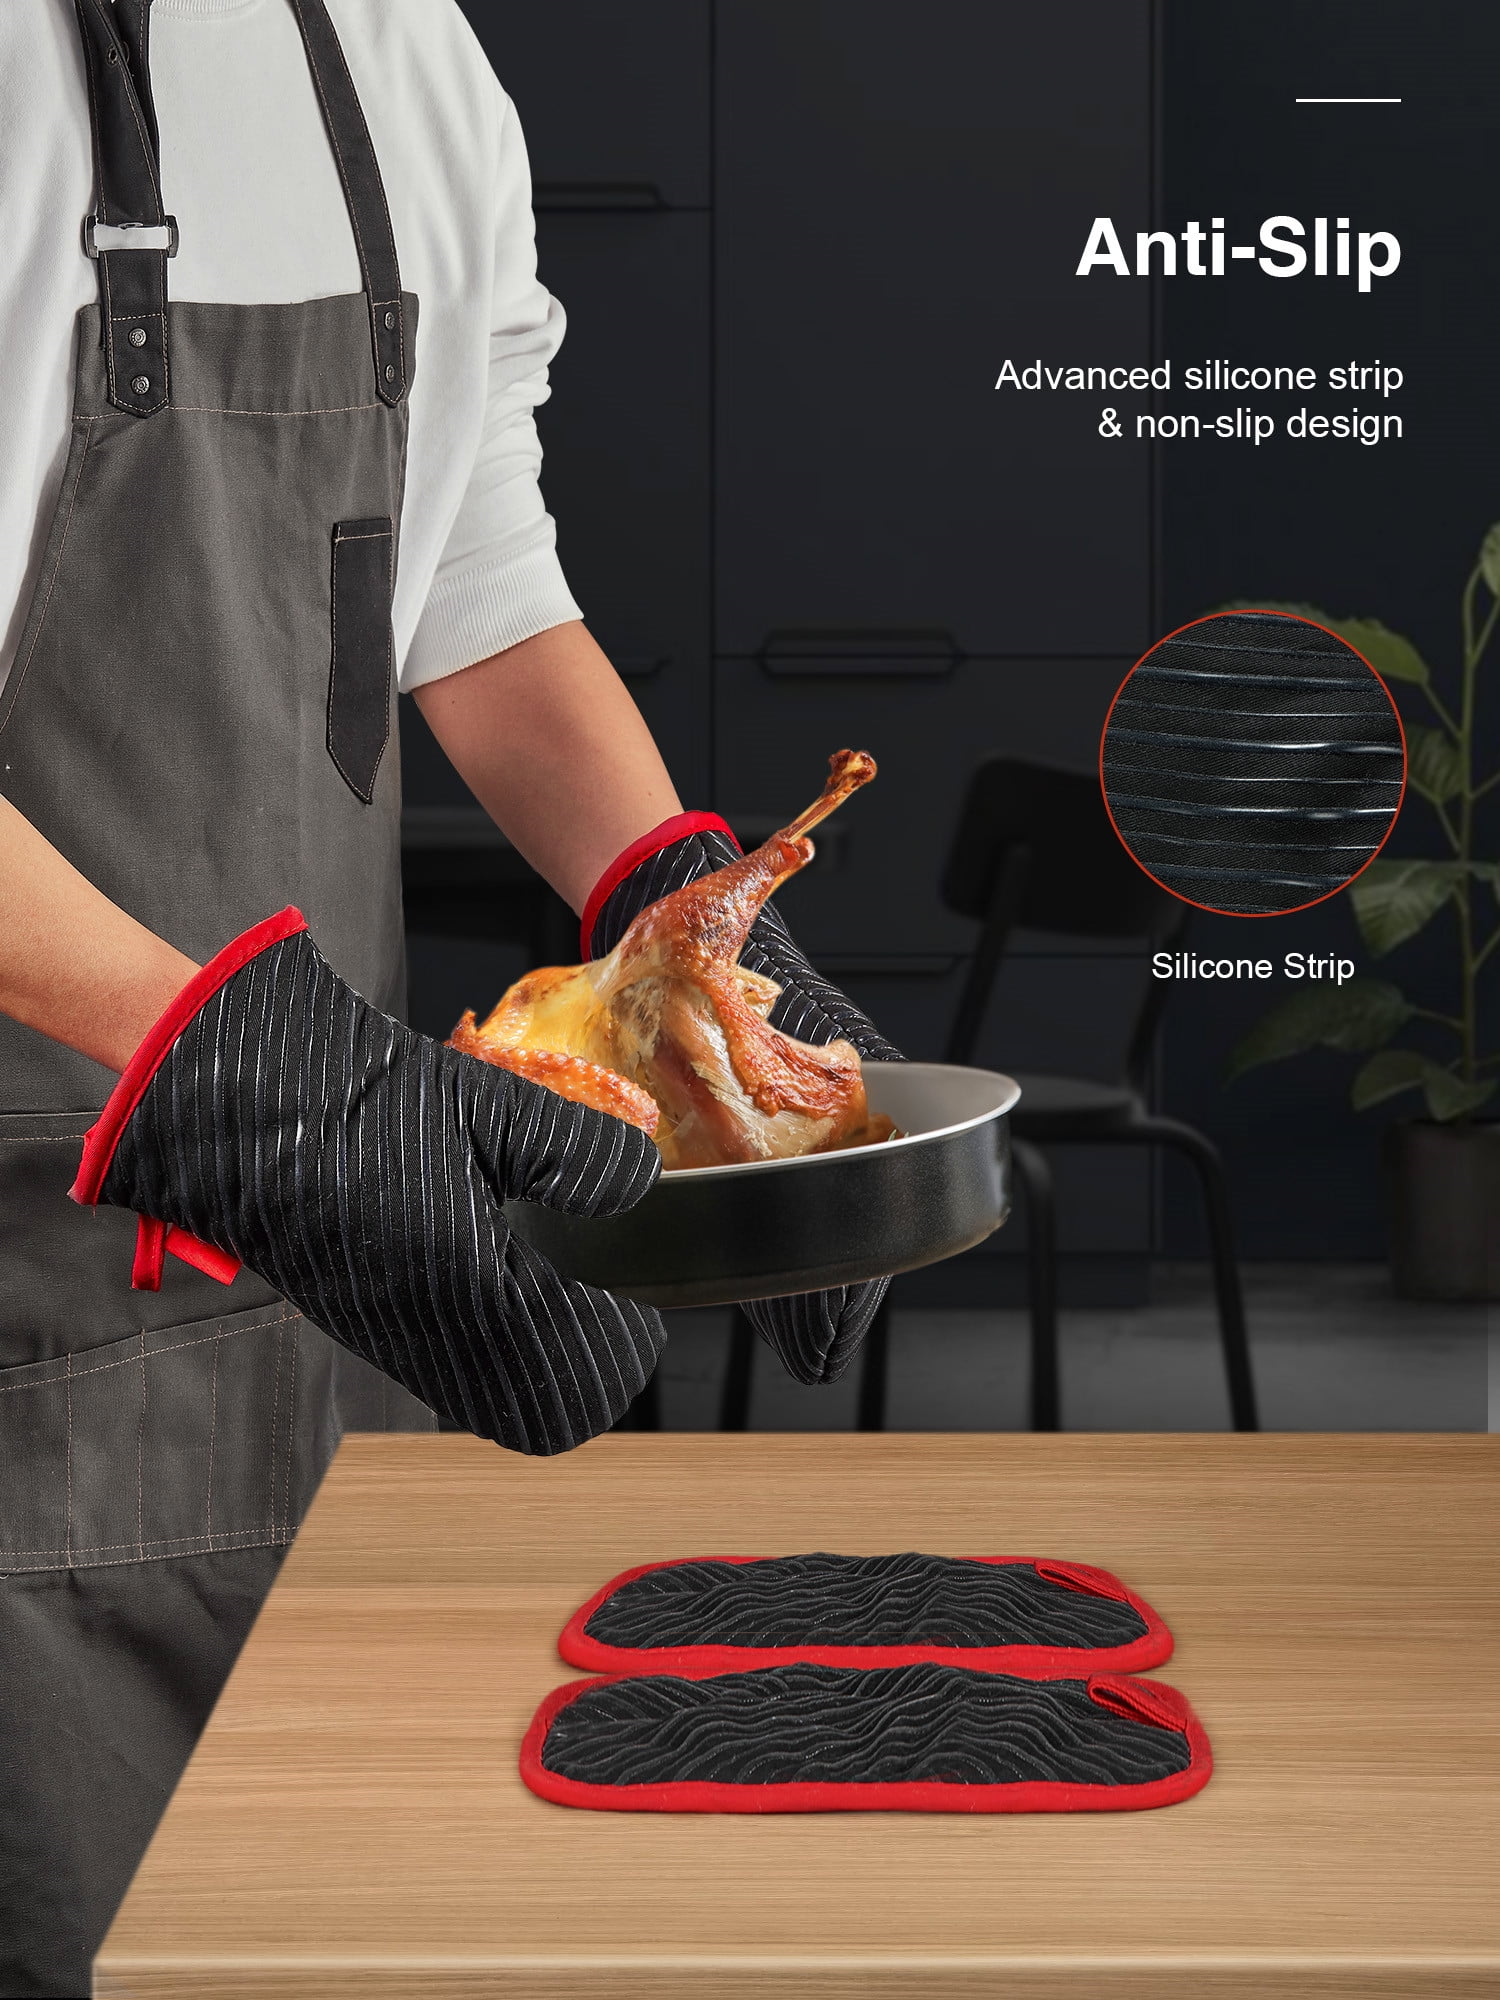 Bestonzon 4pcs Heat Resistant Oven Mitts and Pot Holders Soft Cotton Lining with Non-Slip Surface for Safe BBQ Cooking Baking Grilling (Black)